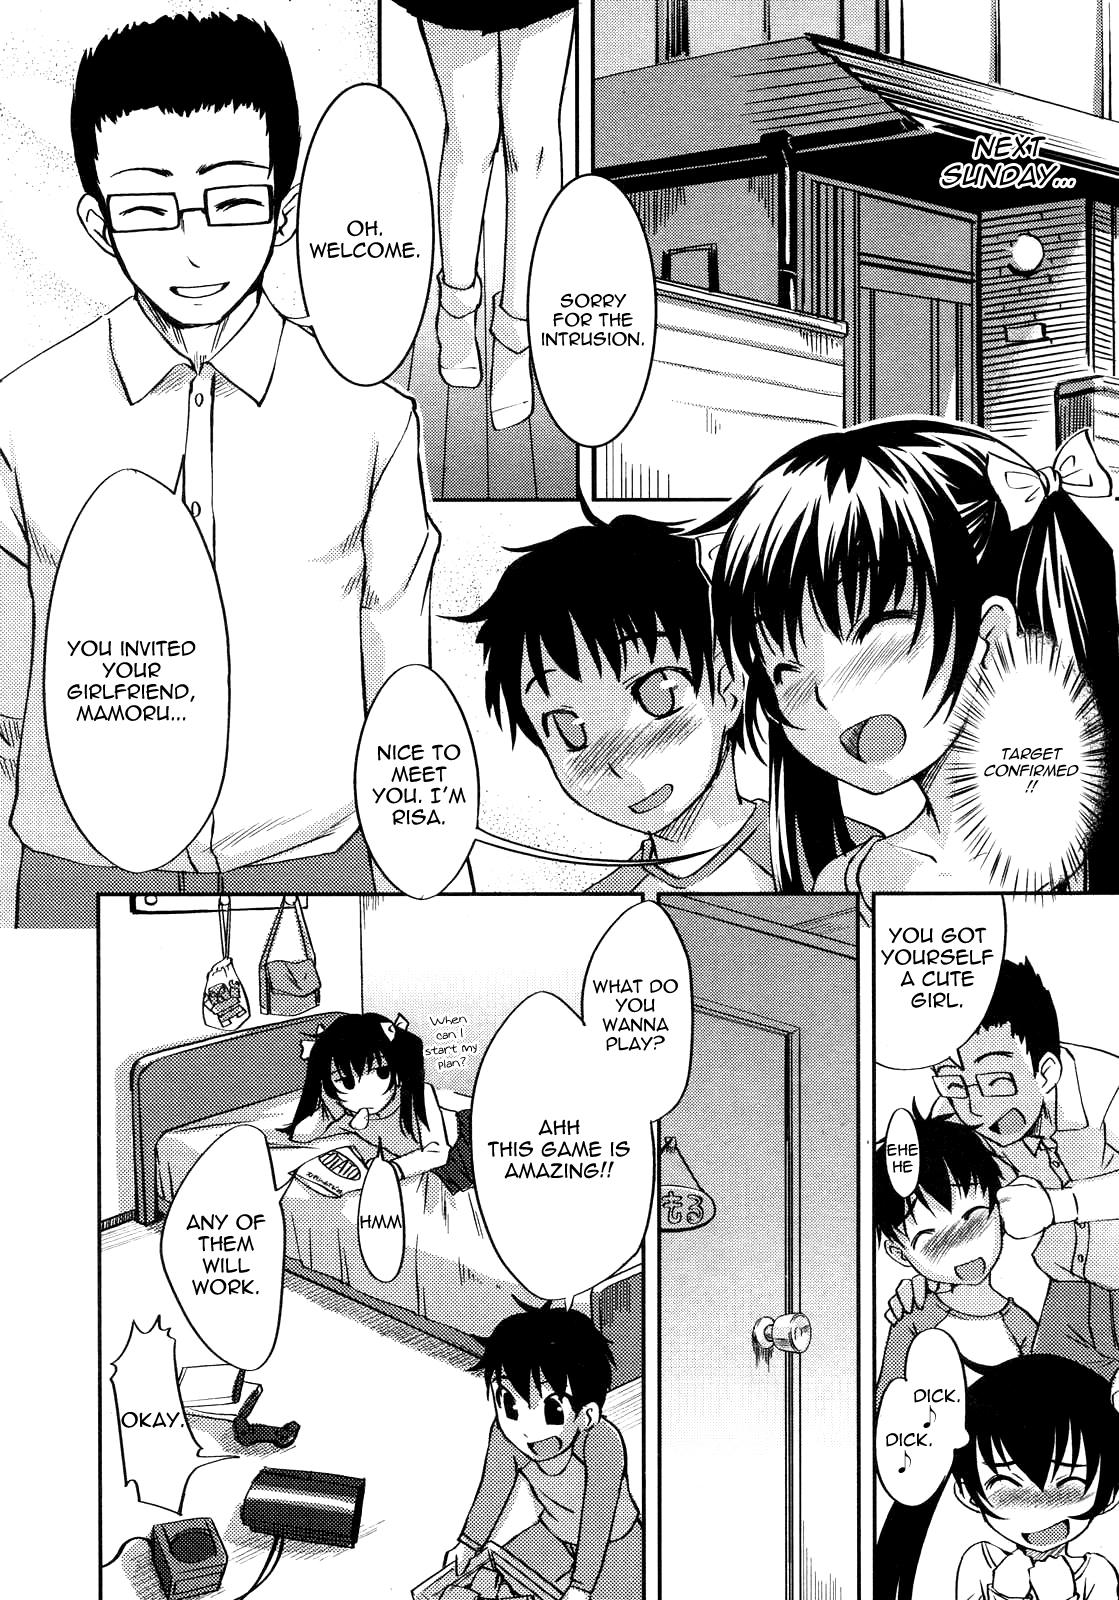 Bitch Otona No Jouken | Requirements of an Adult Sesso - Page 8